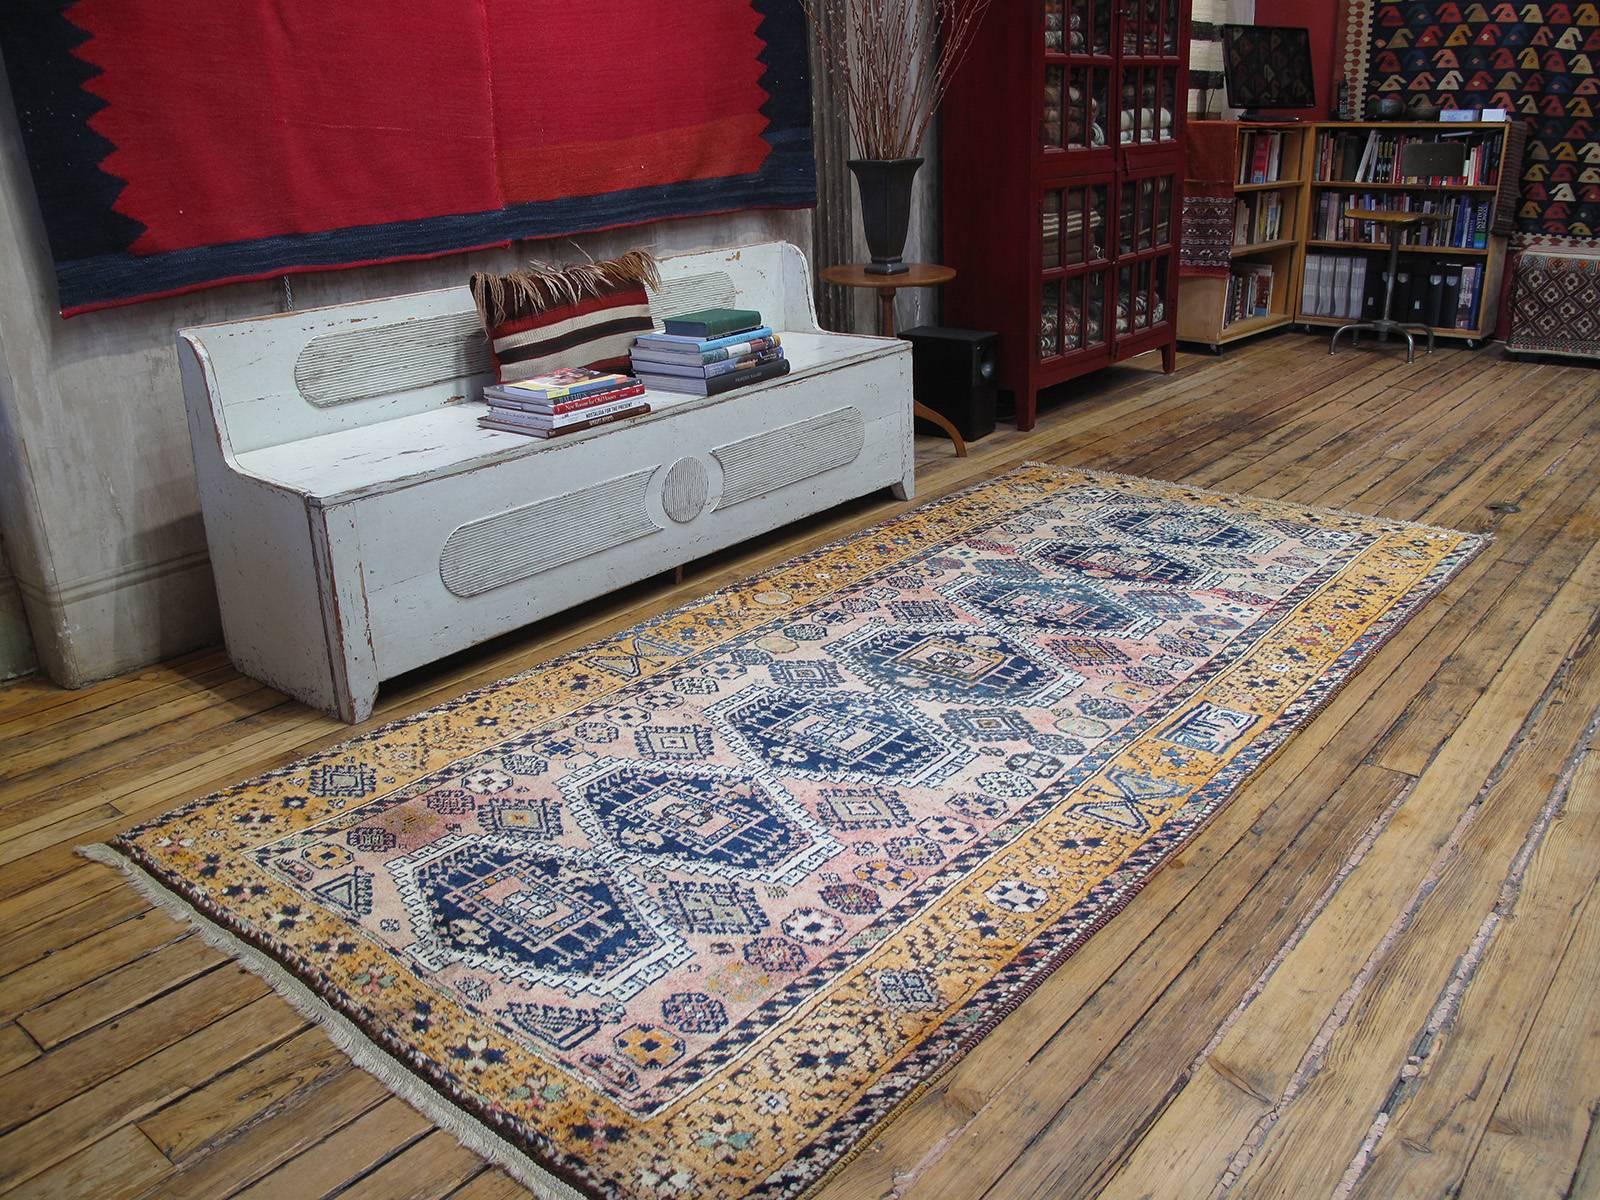 Kurdish rug. A lovely vintage Kurdish rug in the typical long format. Glossy wool, unusual color palette.